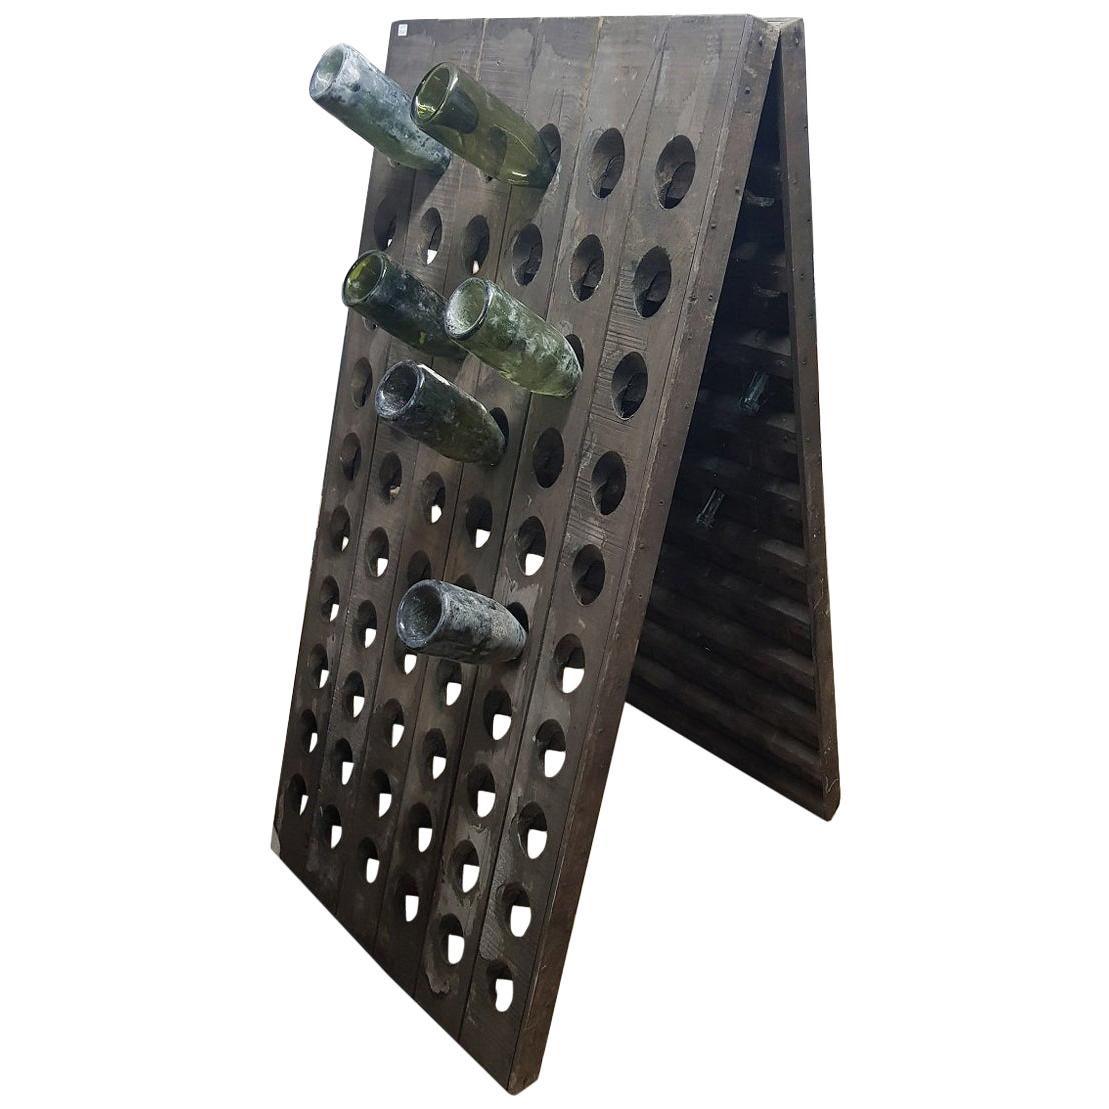 20th Century French Champagne Rack, Pupitre or Wine Rack/Room Divider For Sale